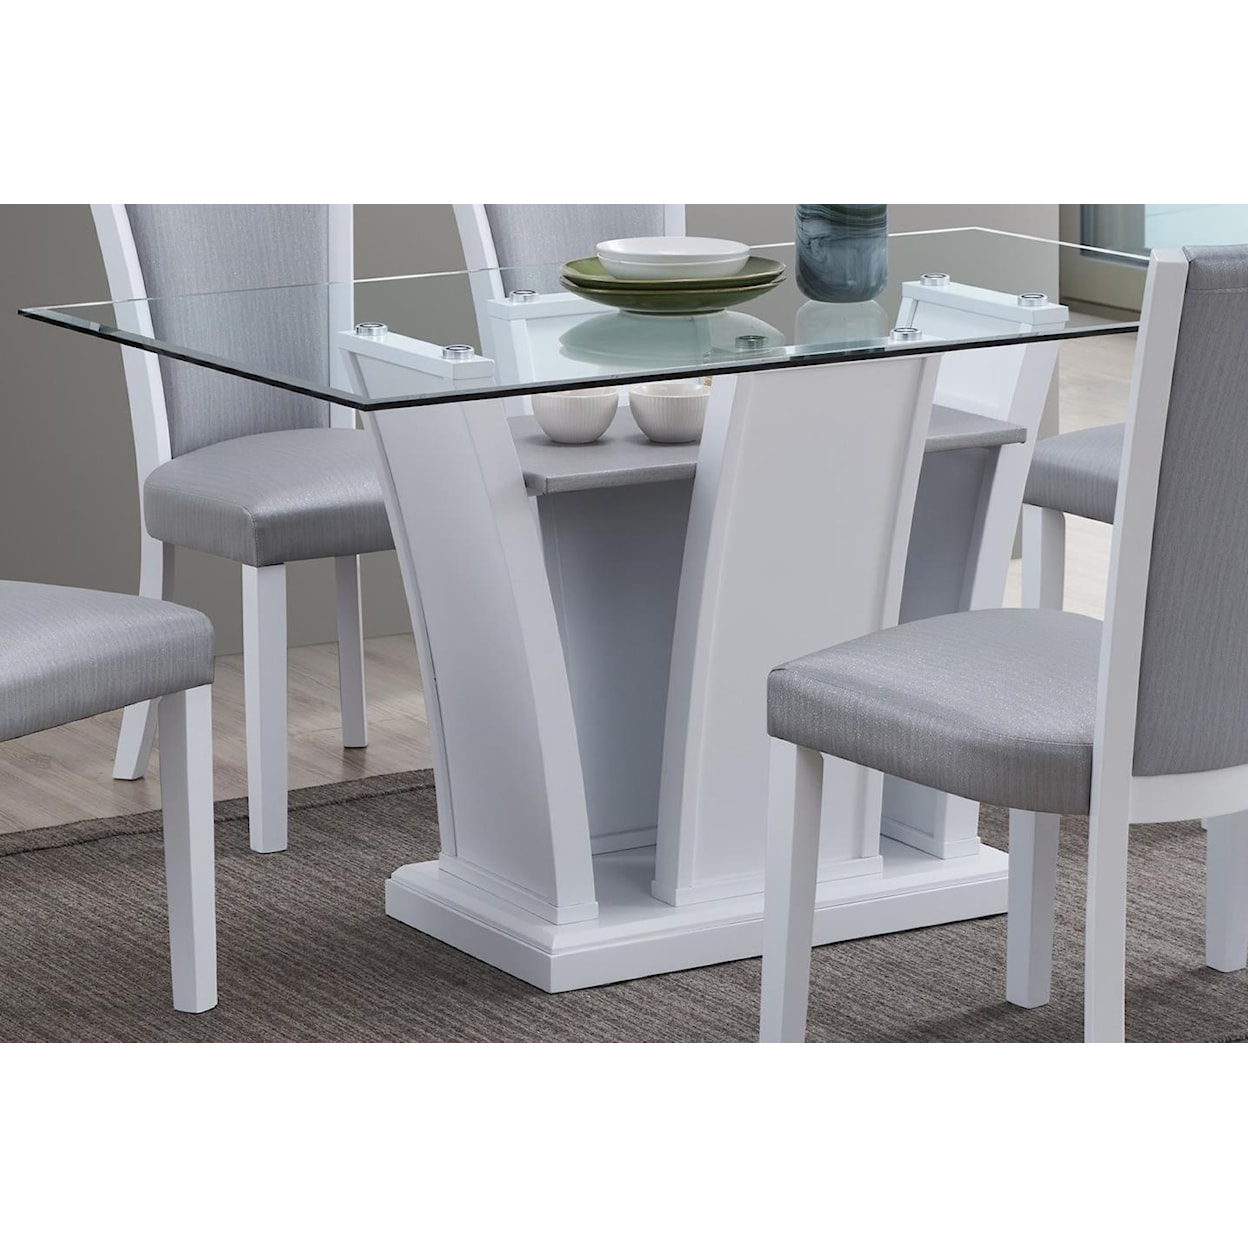 New Classic Platina Dining Table